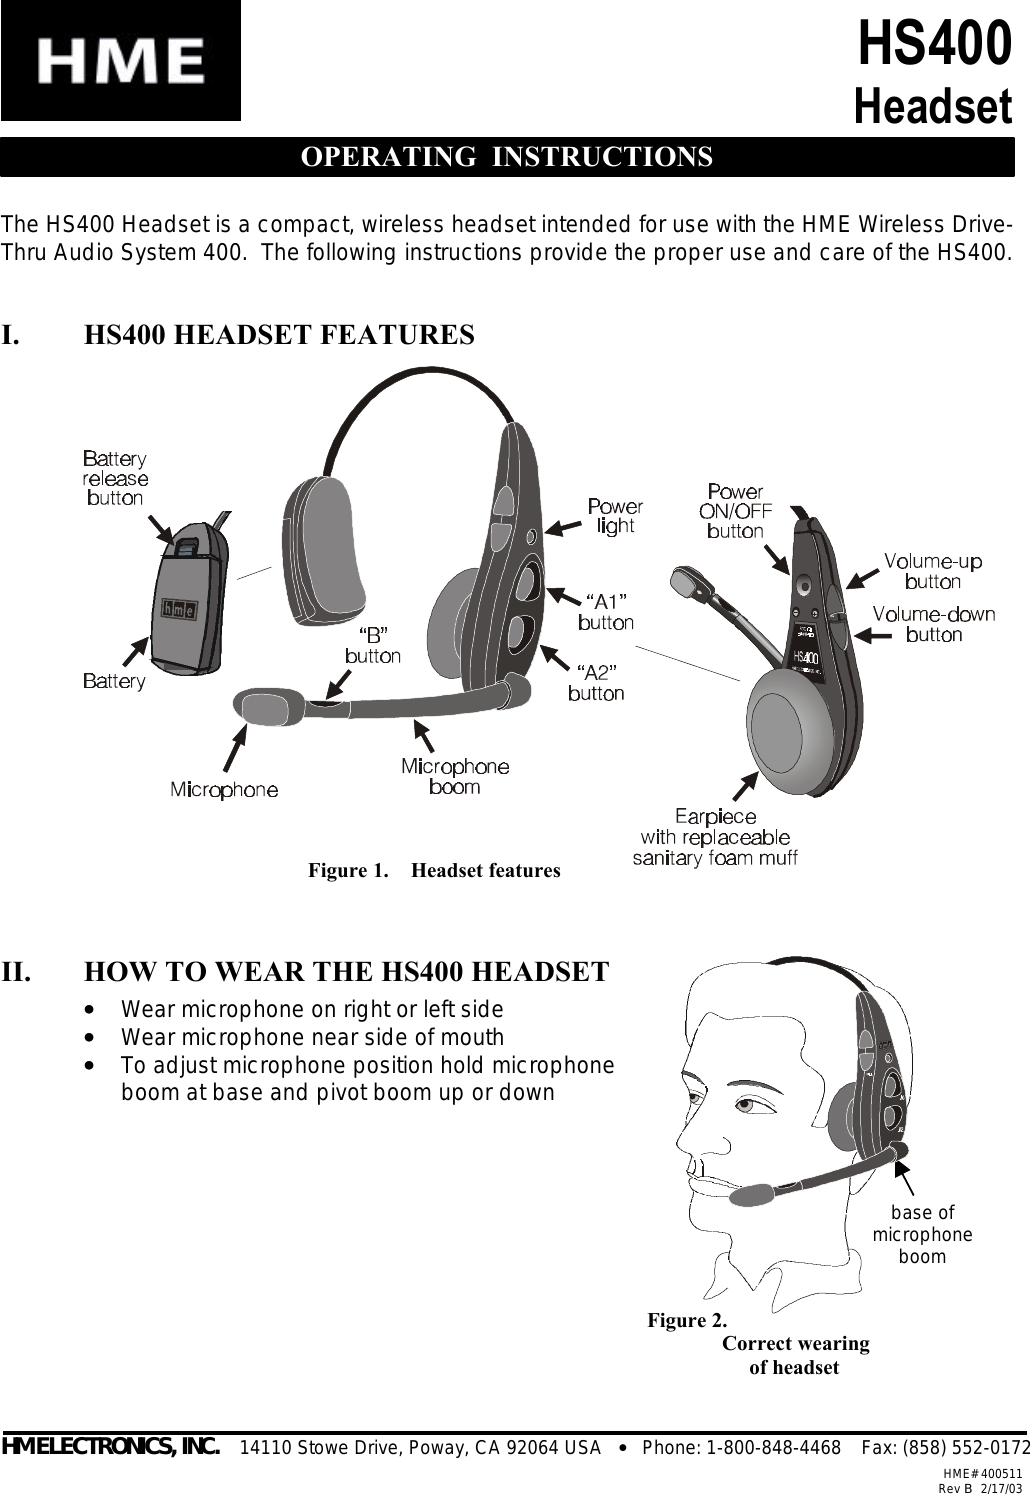  Figure 2.     Correct wearing          of headset base of microphone boom HS400 Headset  OPERATING  INSTRUCTIONS The HS400 Headset is a compact, wireless headset intended for use with the HME Wireless Drive-Thru Audio System 400.  The following instructions provide the proper use and care of the HS400.  I. HS400 HEADSET FEATURES                II. HOW TO WEAR THE HS400 HEADSET ••   Wear microphone on right or left side ••   Wear microphone near side of mouth ••   To adjust microphone position hold microphone boom at base and pivot boom up or down                     HM ELECTRONICS, INC.    14110 Stowe Drive, Poway, CA 92064 USA   •   Phone: 1-800-848-4468    Fax: (858) 552-0172HME# 400511Rev B   2/17/03Figure 1.    Headset features 